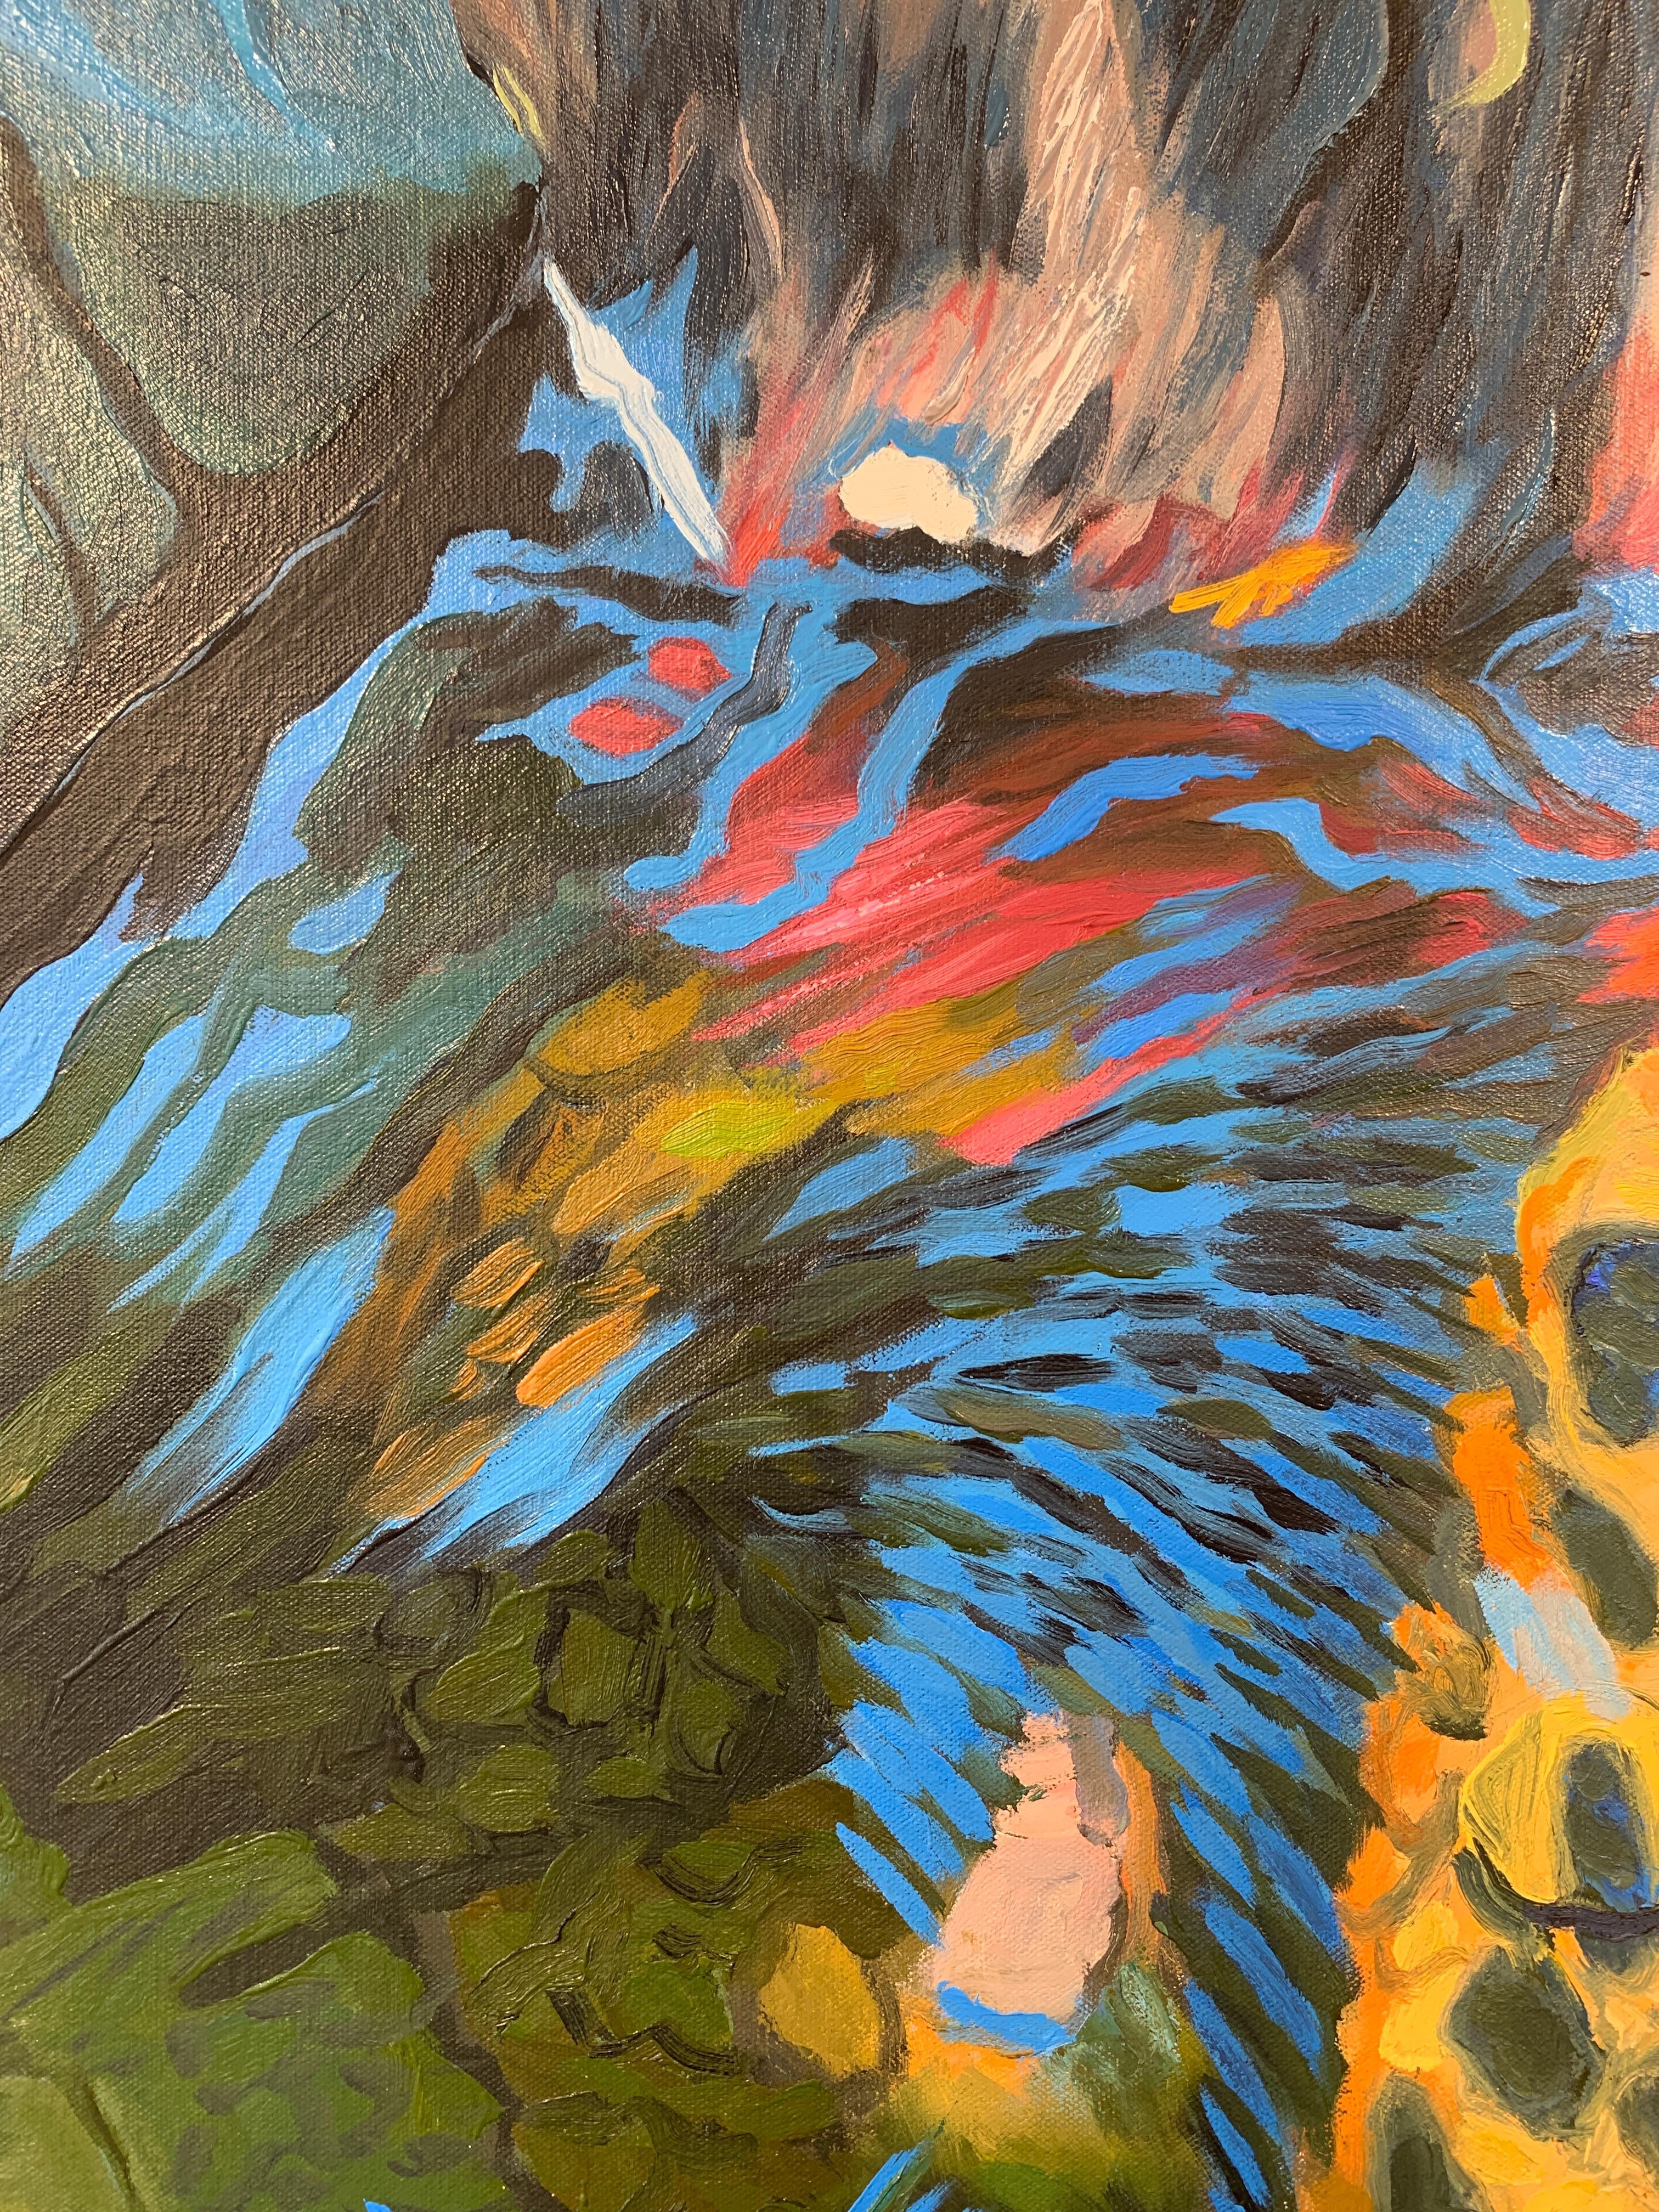 Shallow Creekbed, James Burpee Acrylic Canvas Landscape Water Reflection Nature

James' recent work (most often without horizon lines) is a fascinating maze of light, form, reflection and movement.  His earlier work (pre-2000) uses allegory and